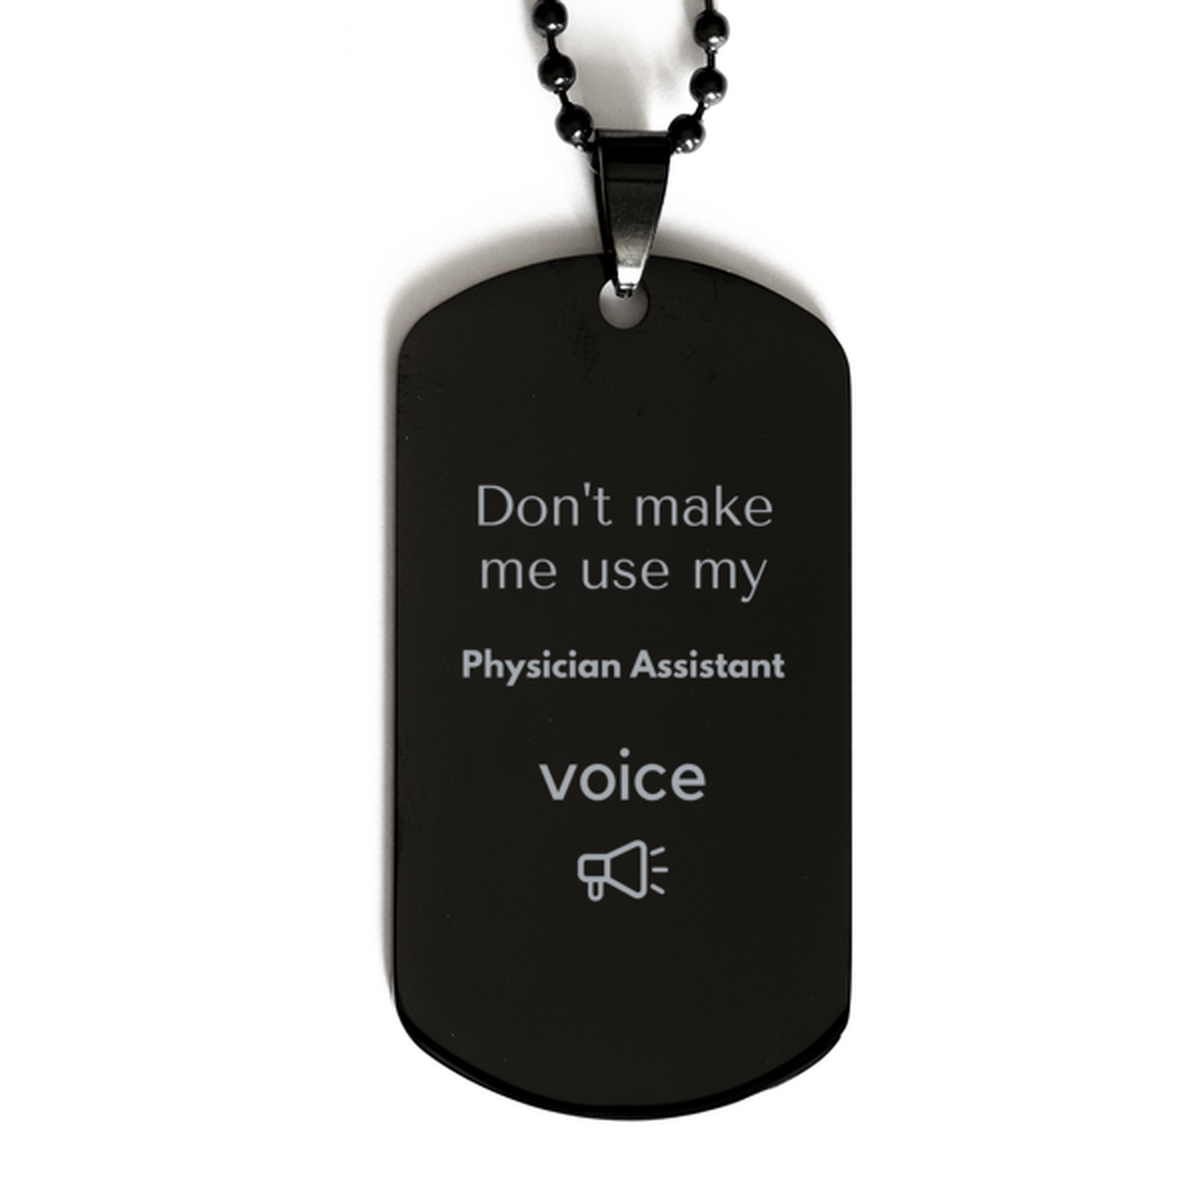 Don't make me use my Physician Assistant voice, Sarcasm Physician Assistant Gifts, Christmas Physician Assistant Black Dog Tag Birthday Unique Gifts For Physician Assistant Coworkers, Men, Women, Colleague, Friends